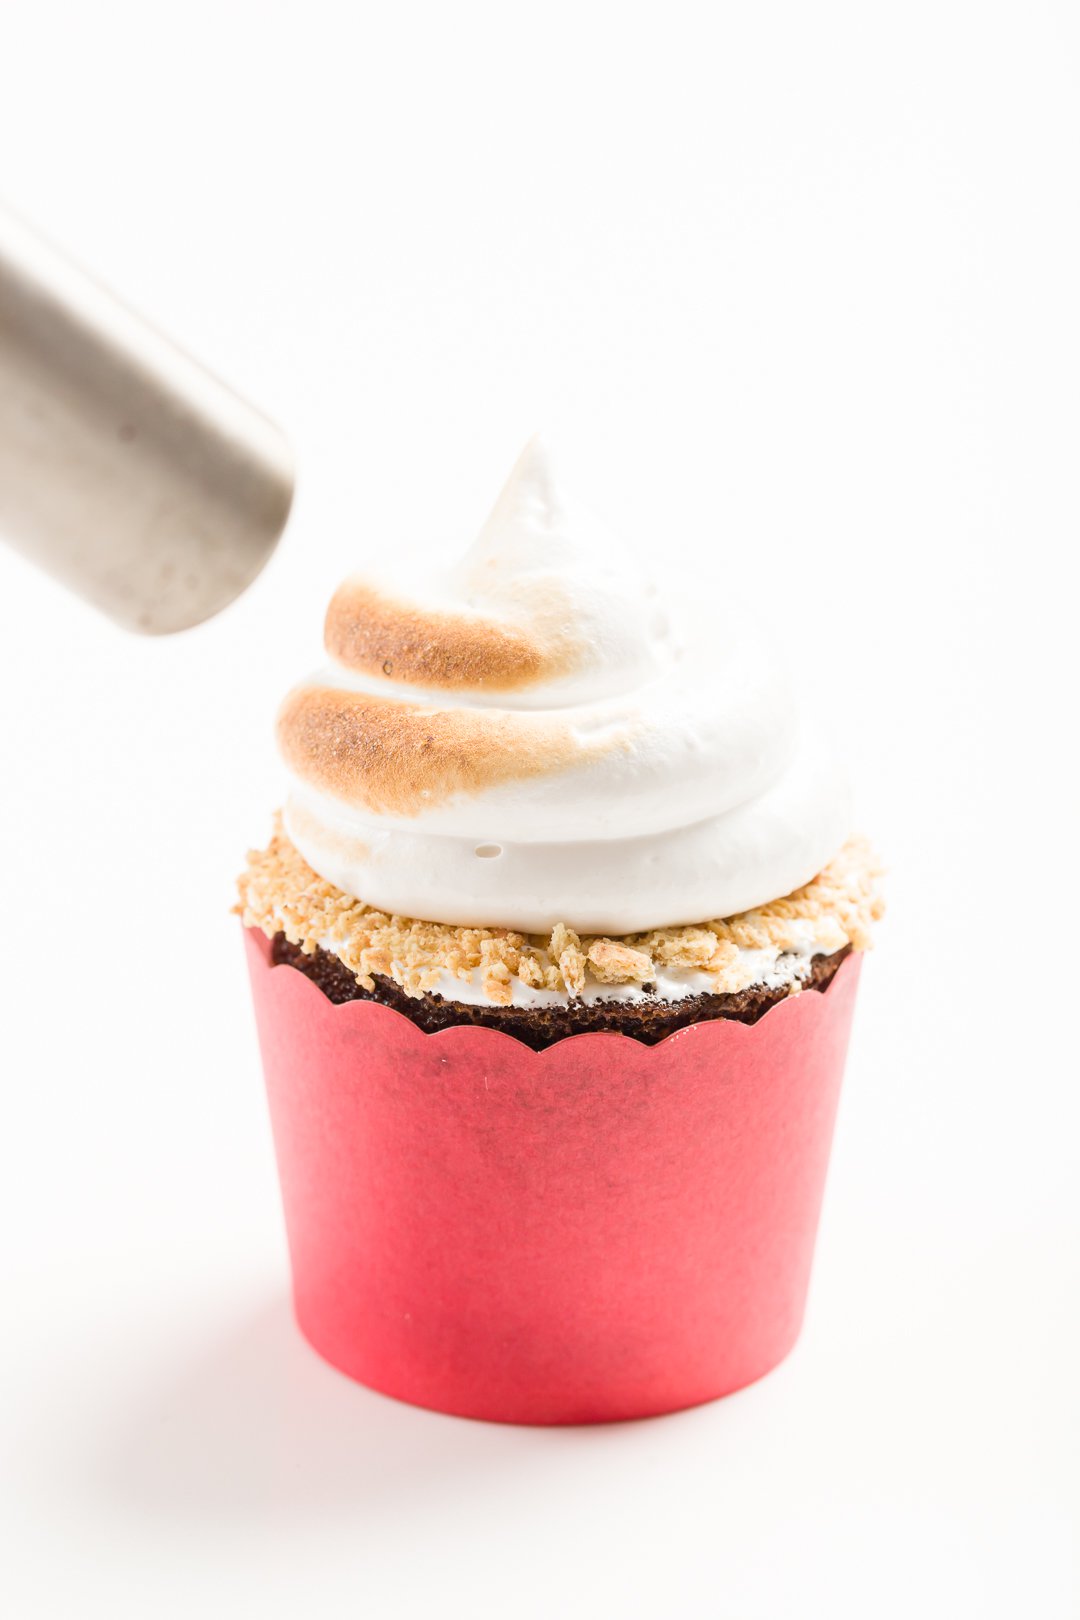 head-on view of using a culinary torch to toast marshmallow frosting